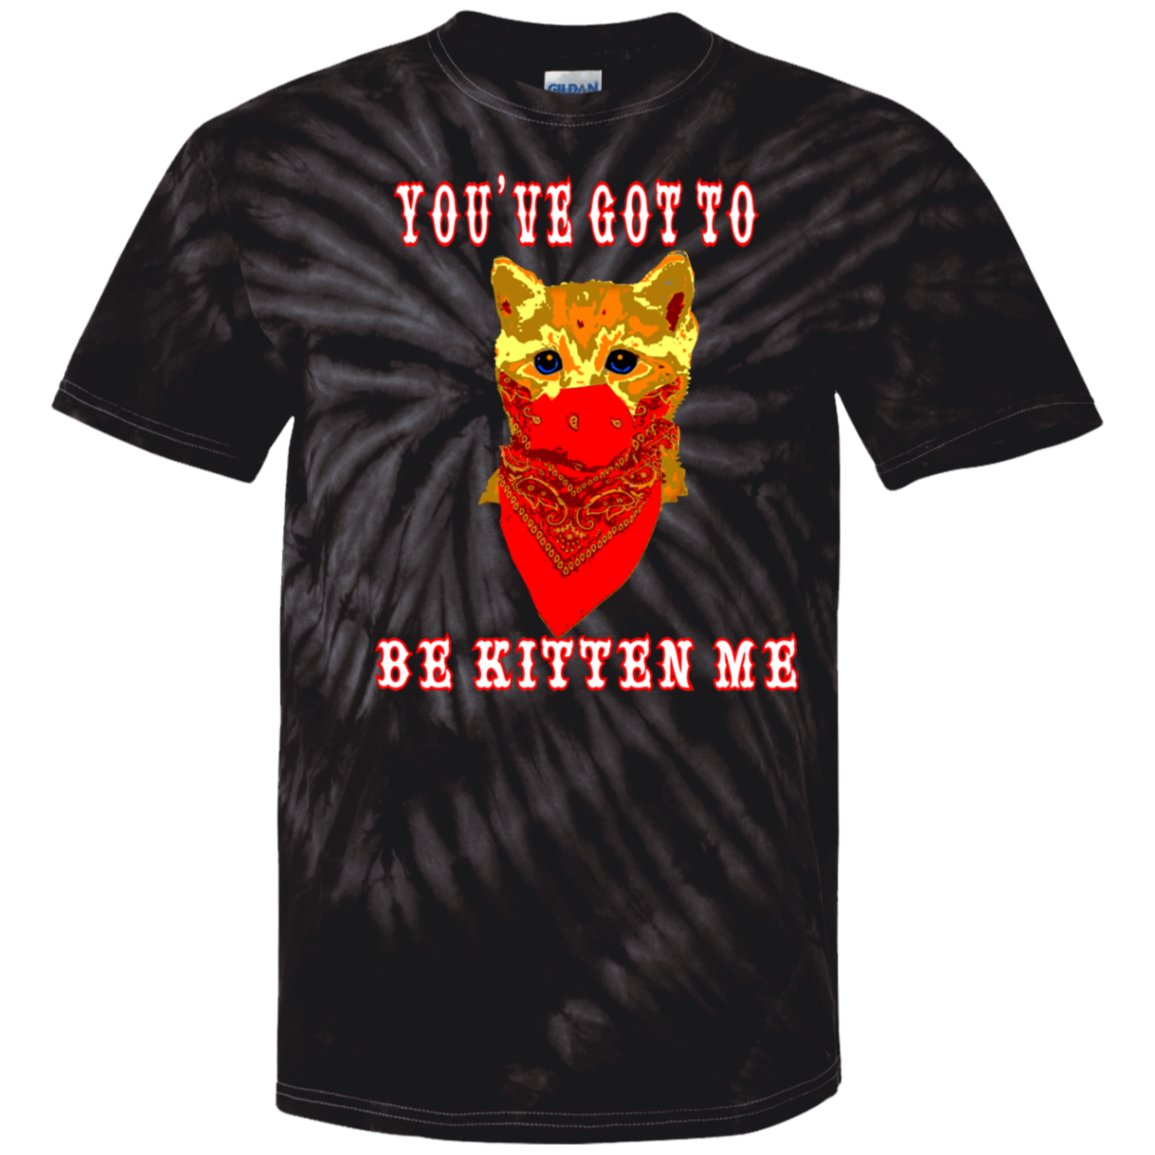 ArtichokeUSA Custom Design. You've Got To Be Kitten Me?! 2020, Not What We Expected. Youth Tie Dye T-Shirt